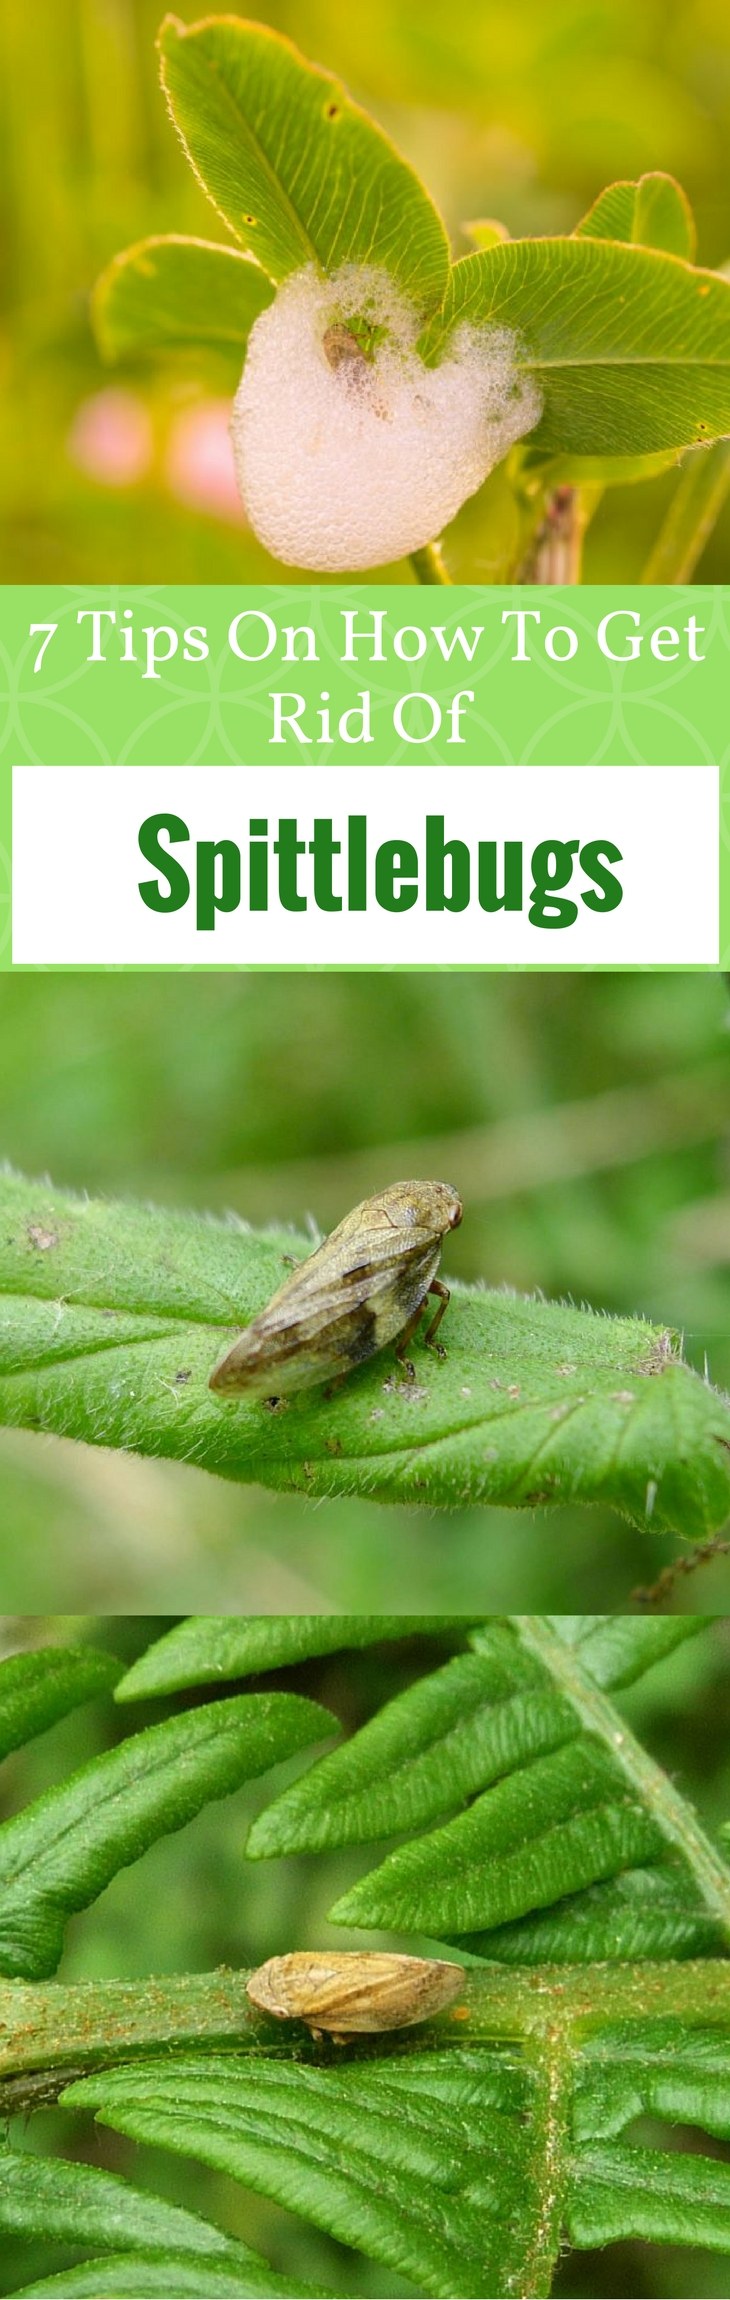 7 Tips On How To Get Rid Of Spittlebugs